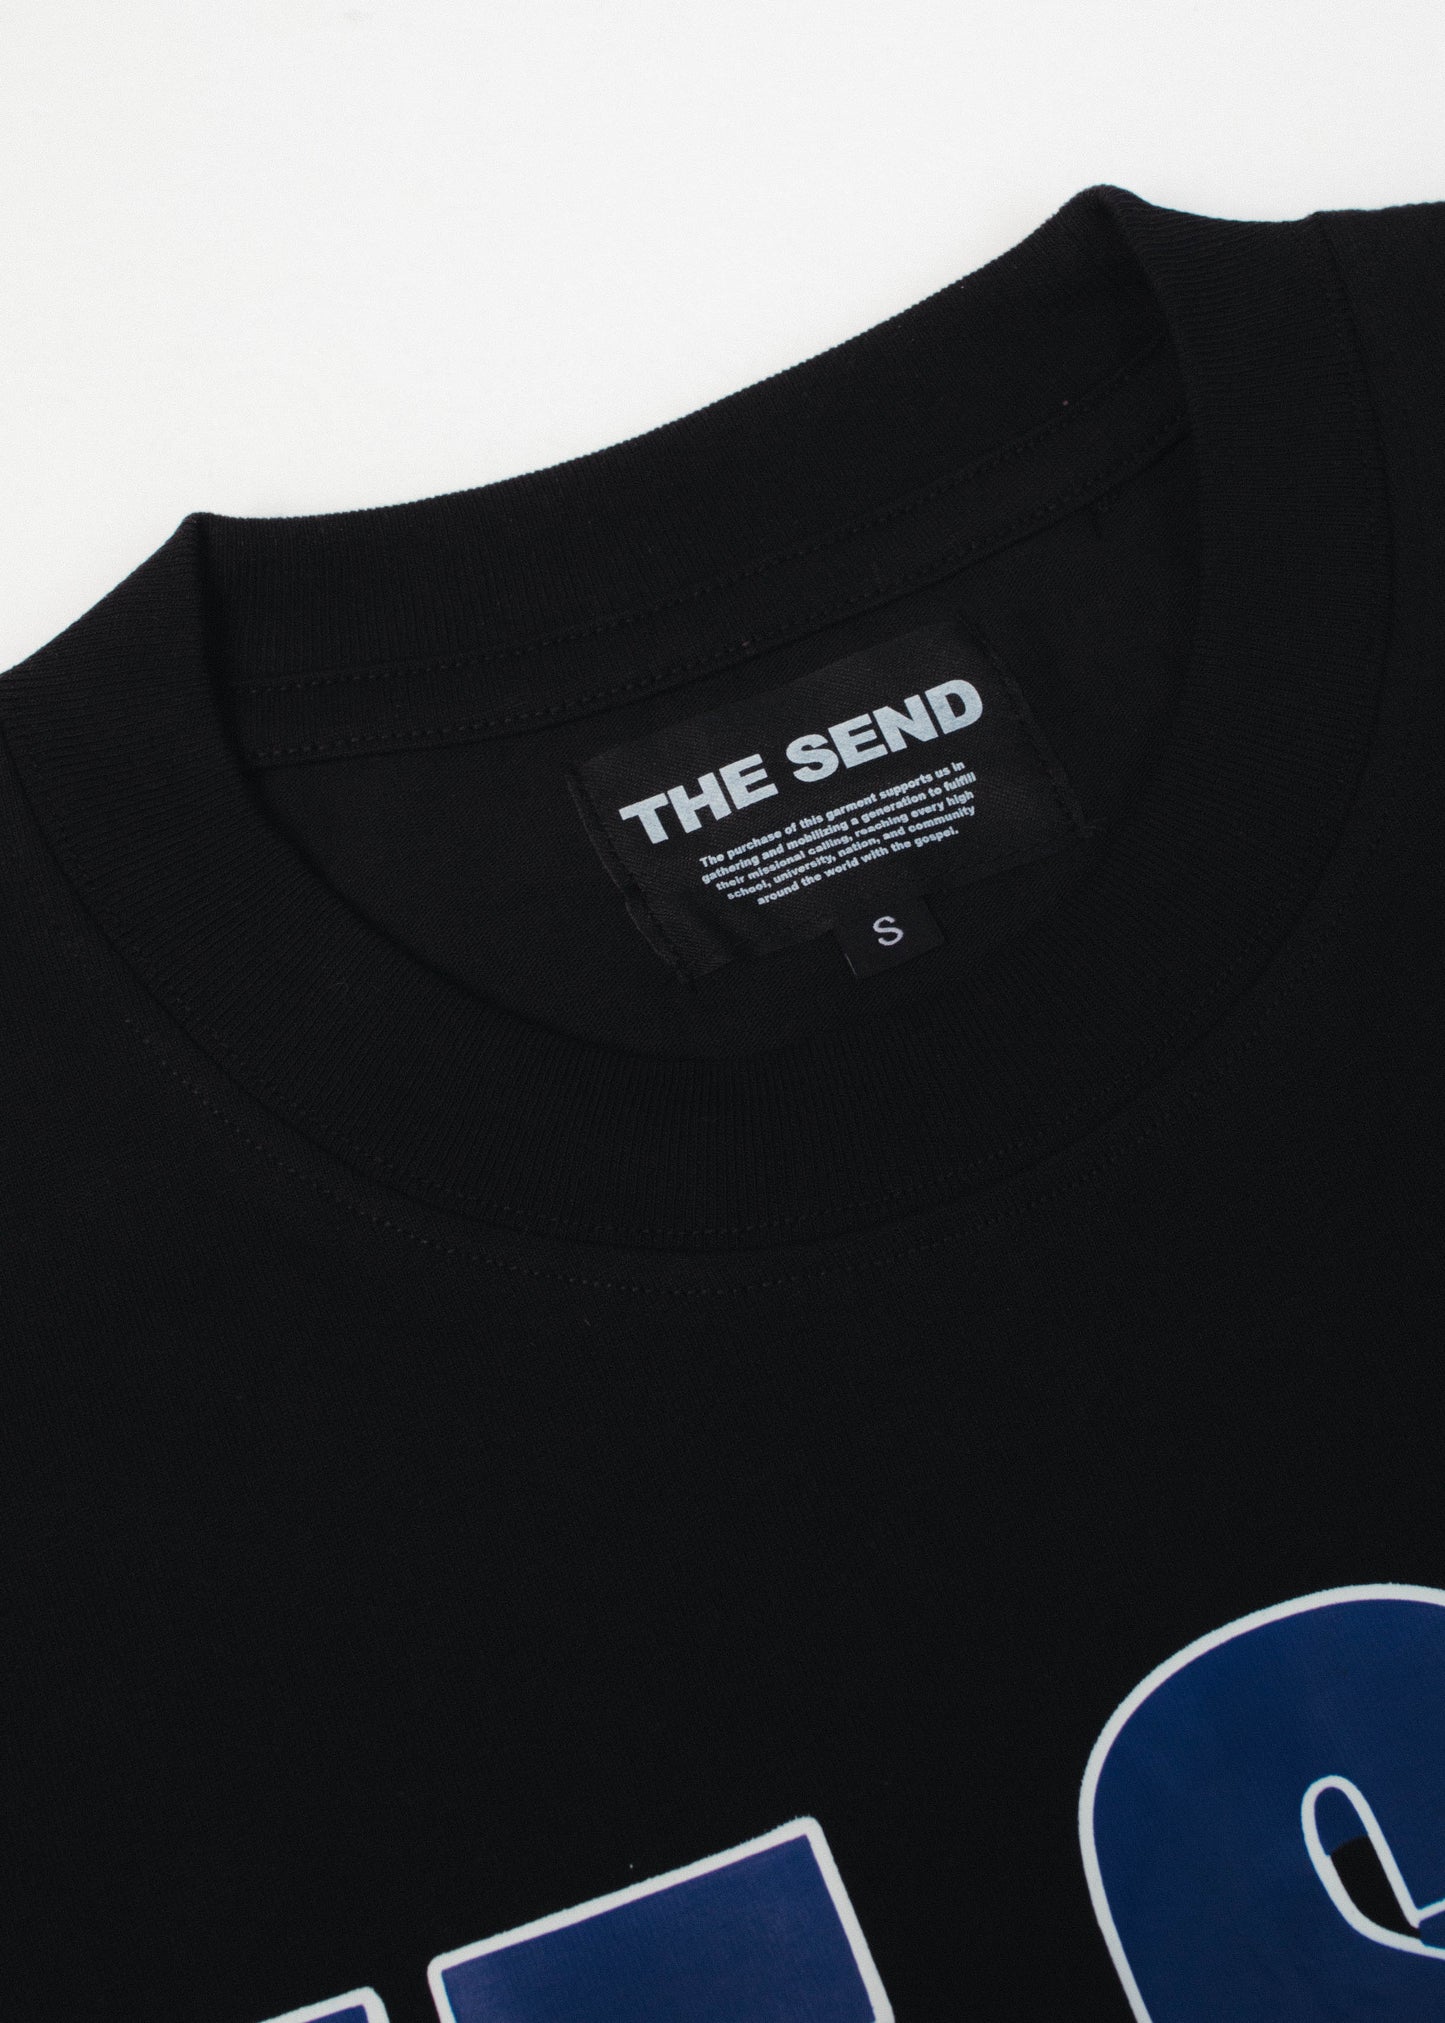 The Send T-Shirt “What’s Your Response?”